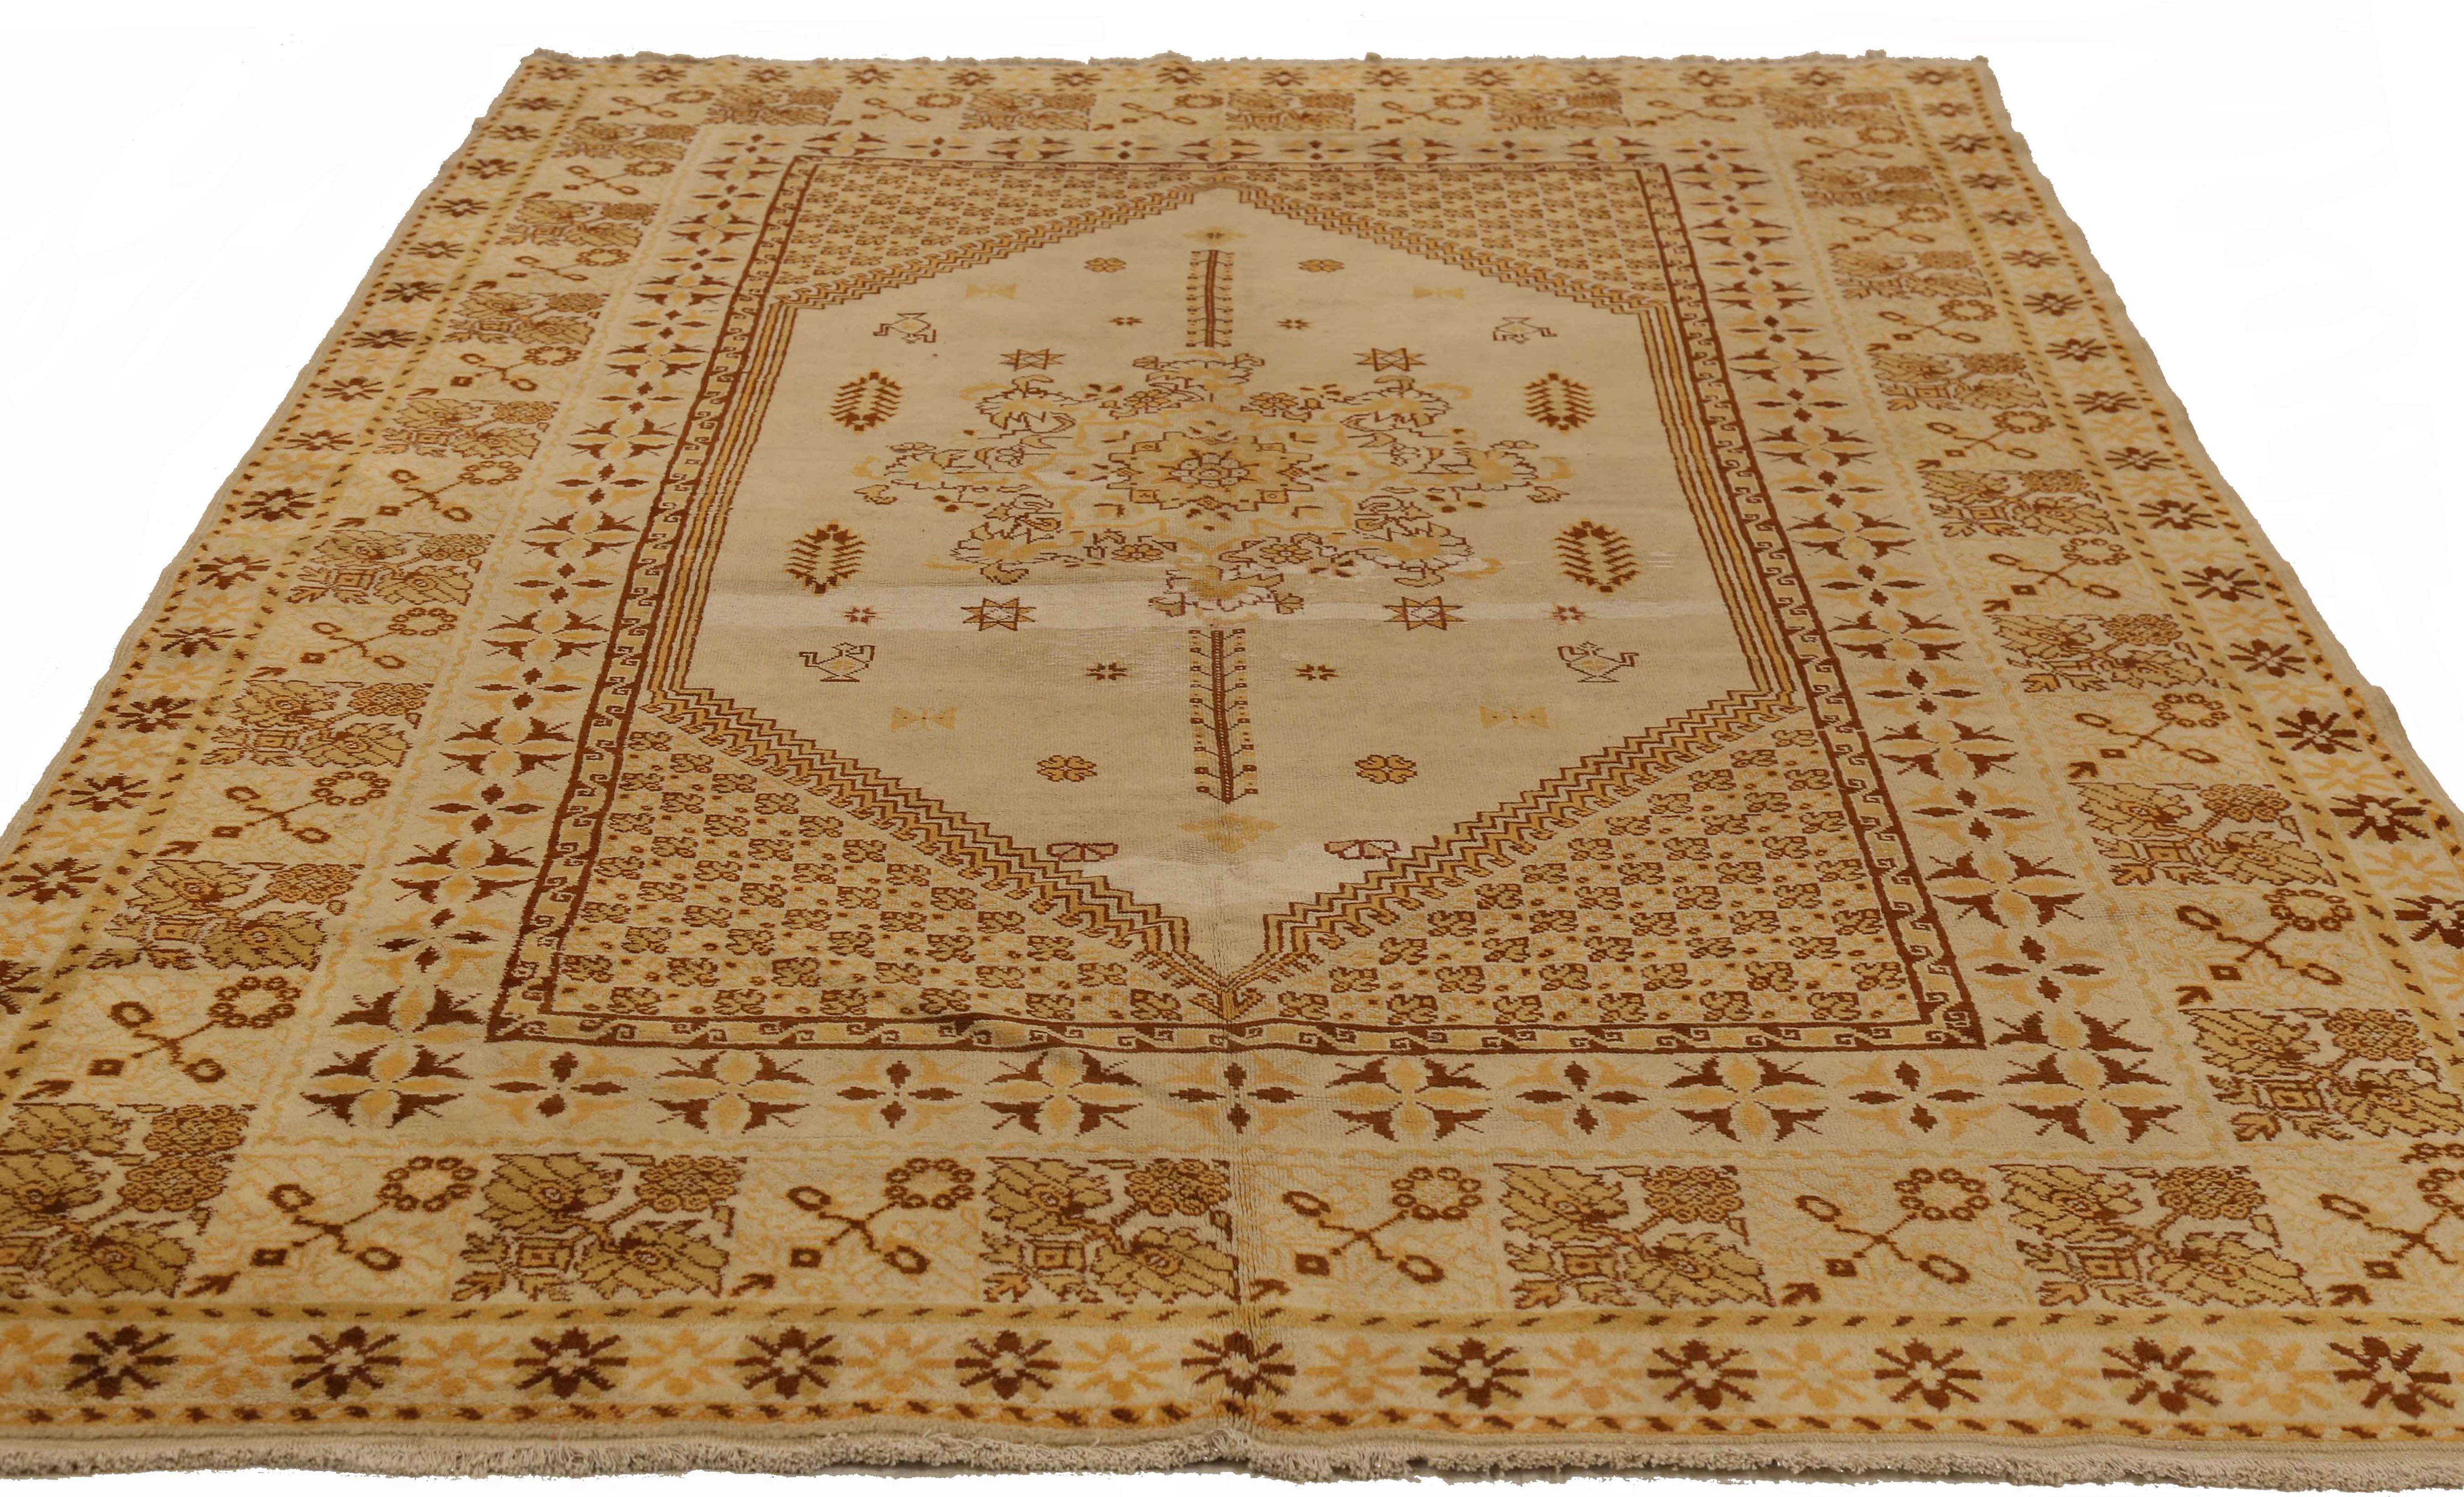 Antique Russian area rug handwoven from the finest sheep’s wool. It’s colored with all-natural vegetable dyes that are safe for humans and pets. It’s a traditional Samarkand design handwoven by expert artisans. It’s a lovely area rug that can be